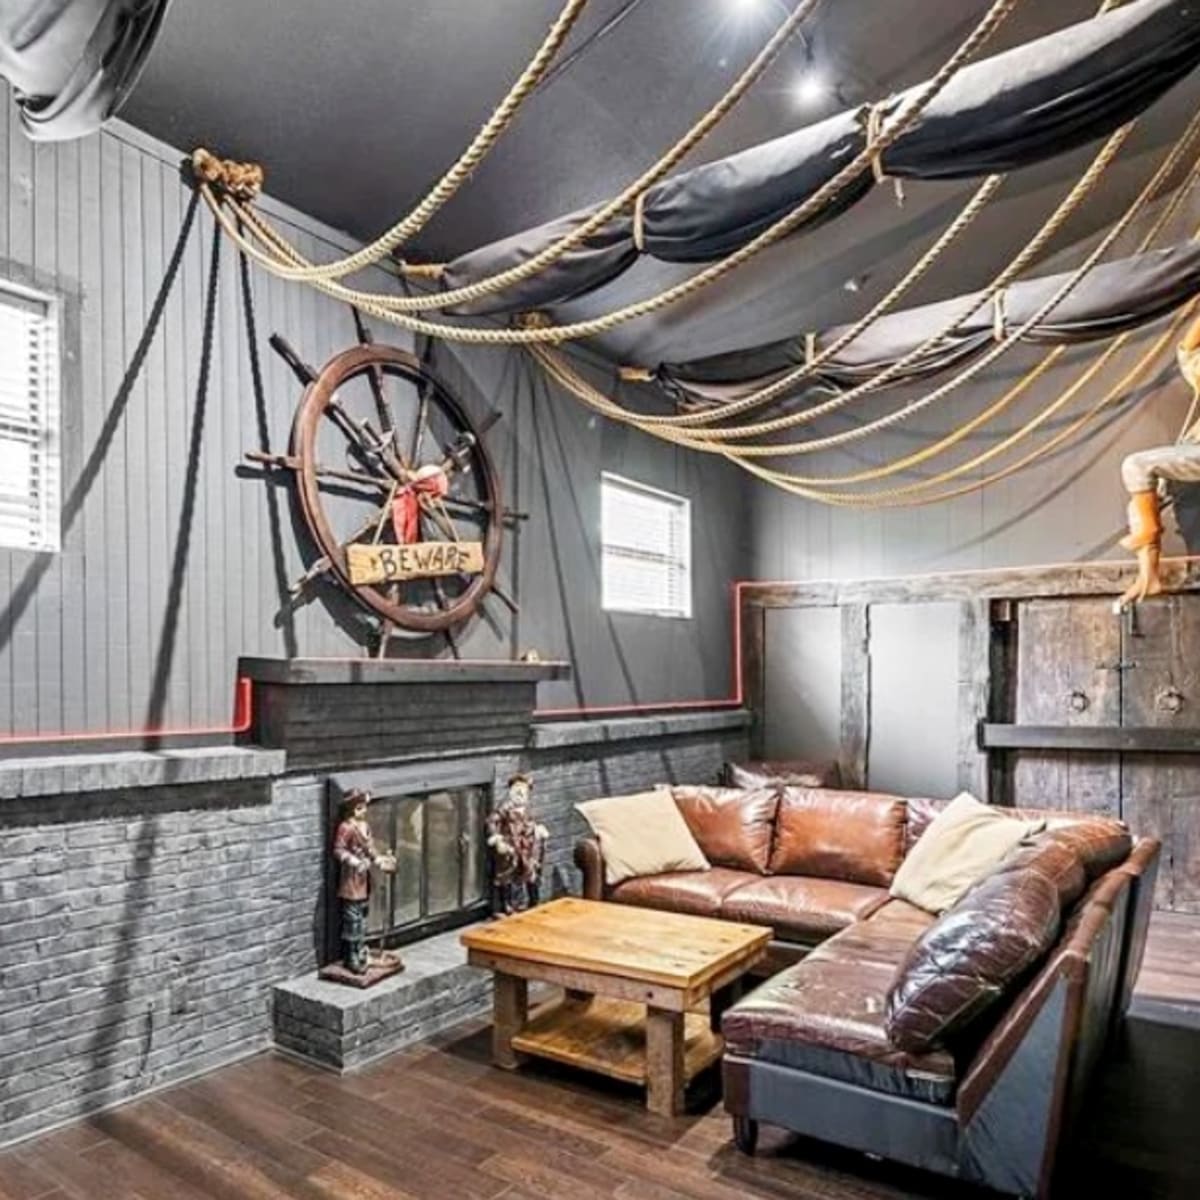 Pirates of the Caribbean'-Themed House for Sale in Viral Listing